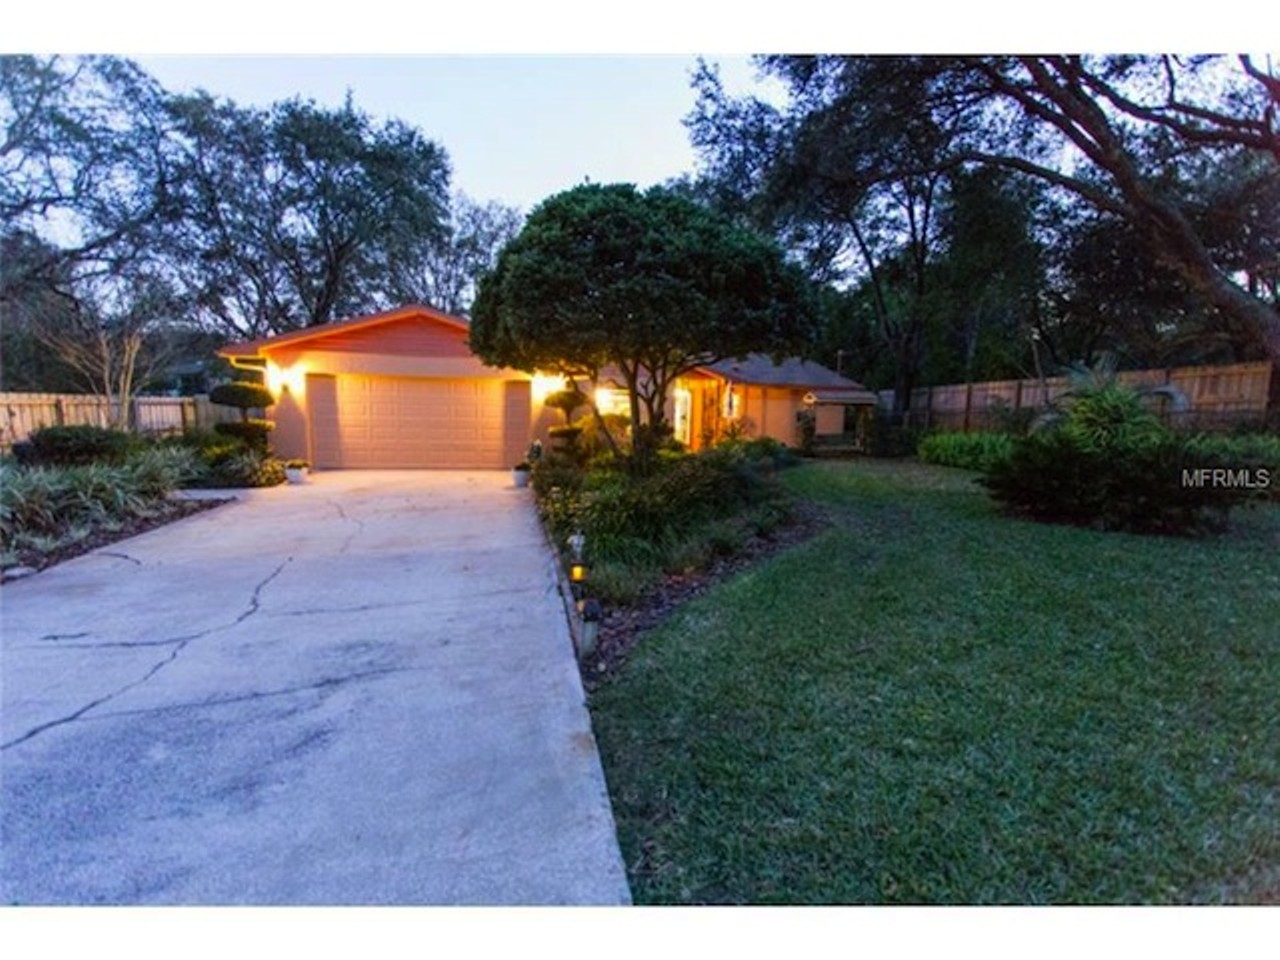 7118 W Livingston St., Orlando, 32835Valued at: $250,000See more photos.